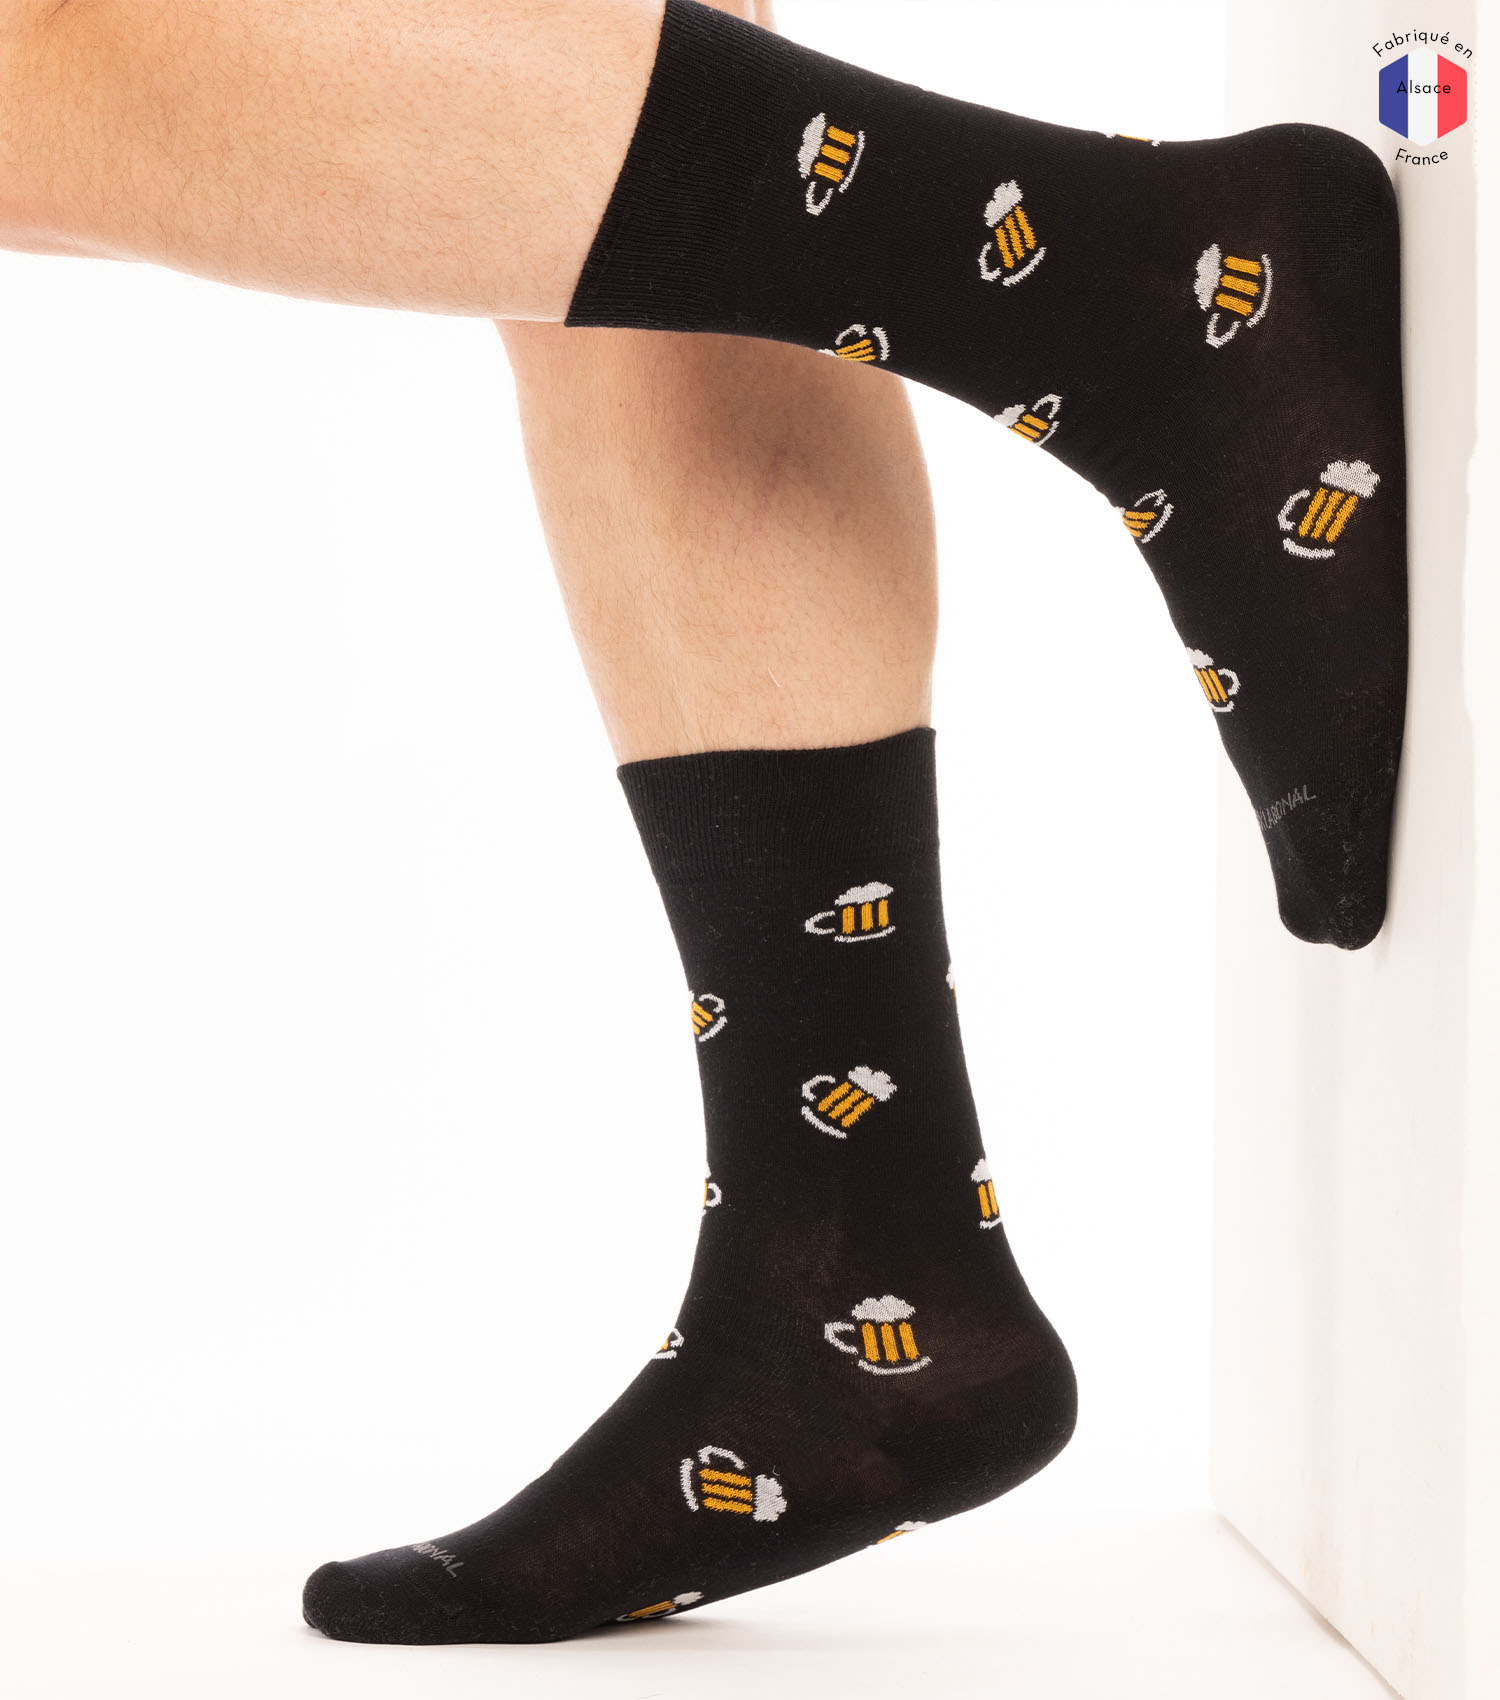 theim-chaussettes-chope-de-biere-homme-labonal-made-in-alsace-1500x1700px